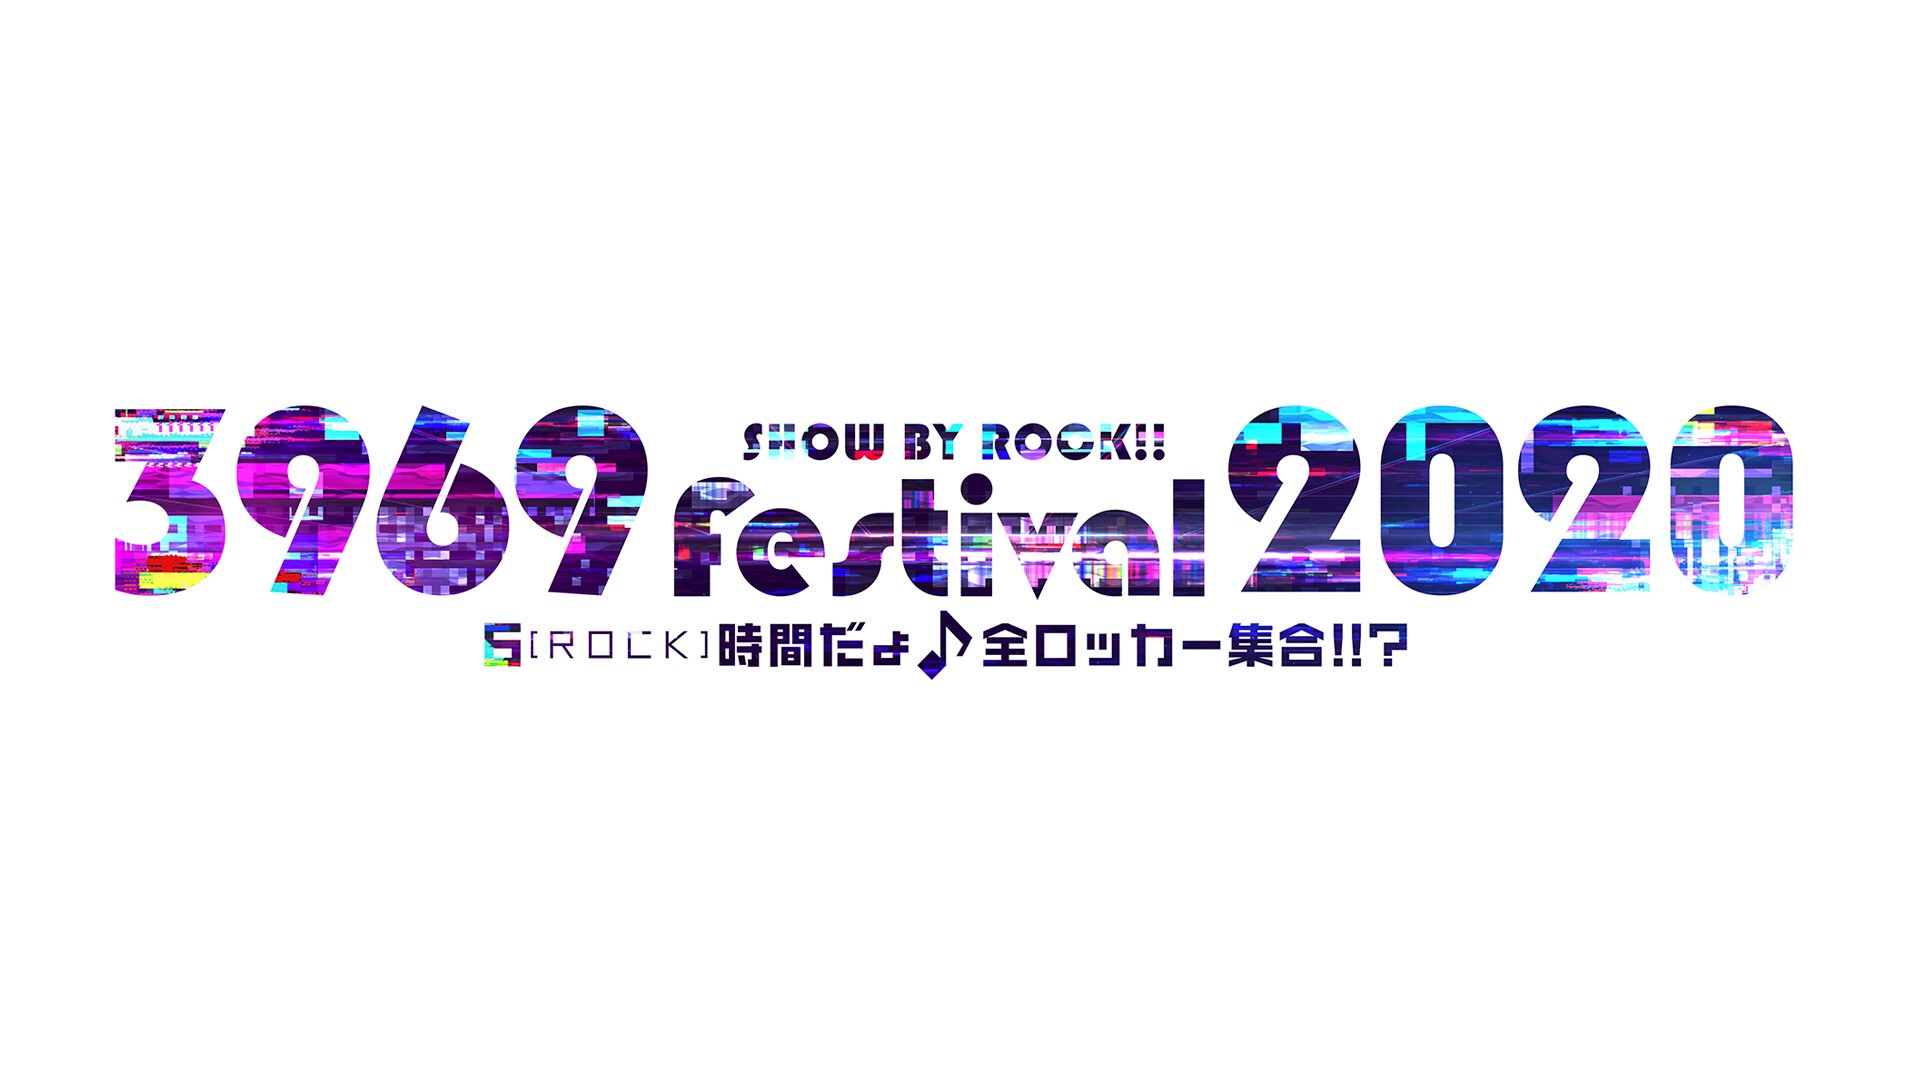 Iflyer Show By Rock 3969 Festival At Zaiko Live Streaming